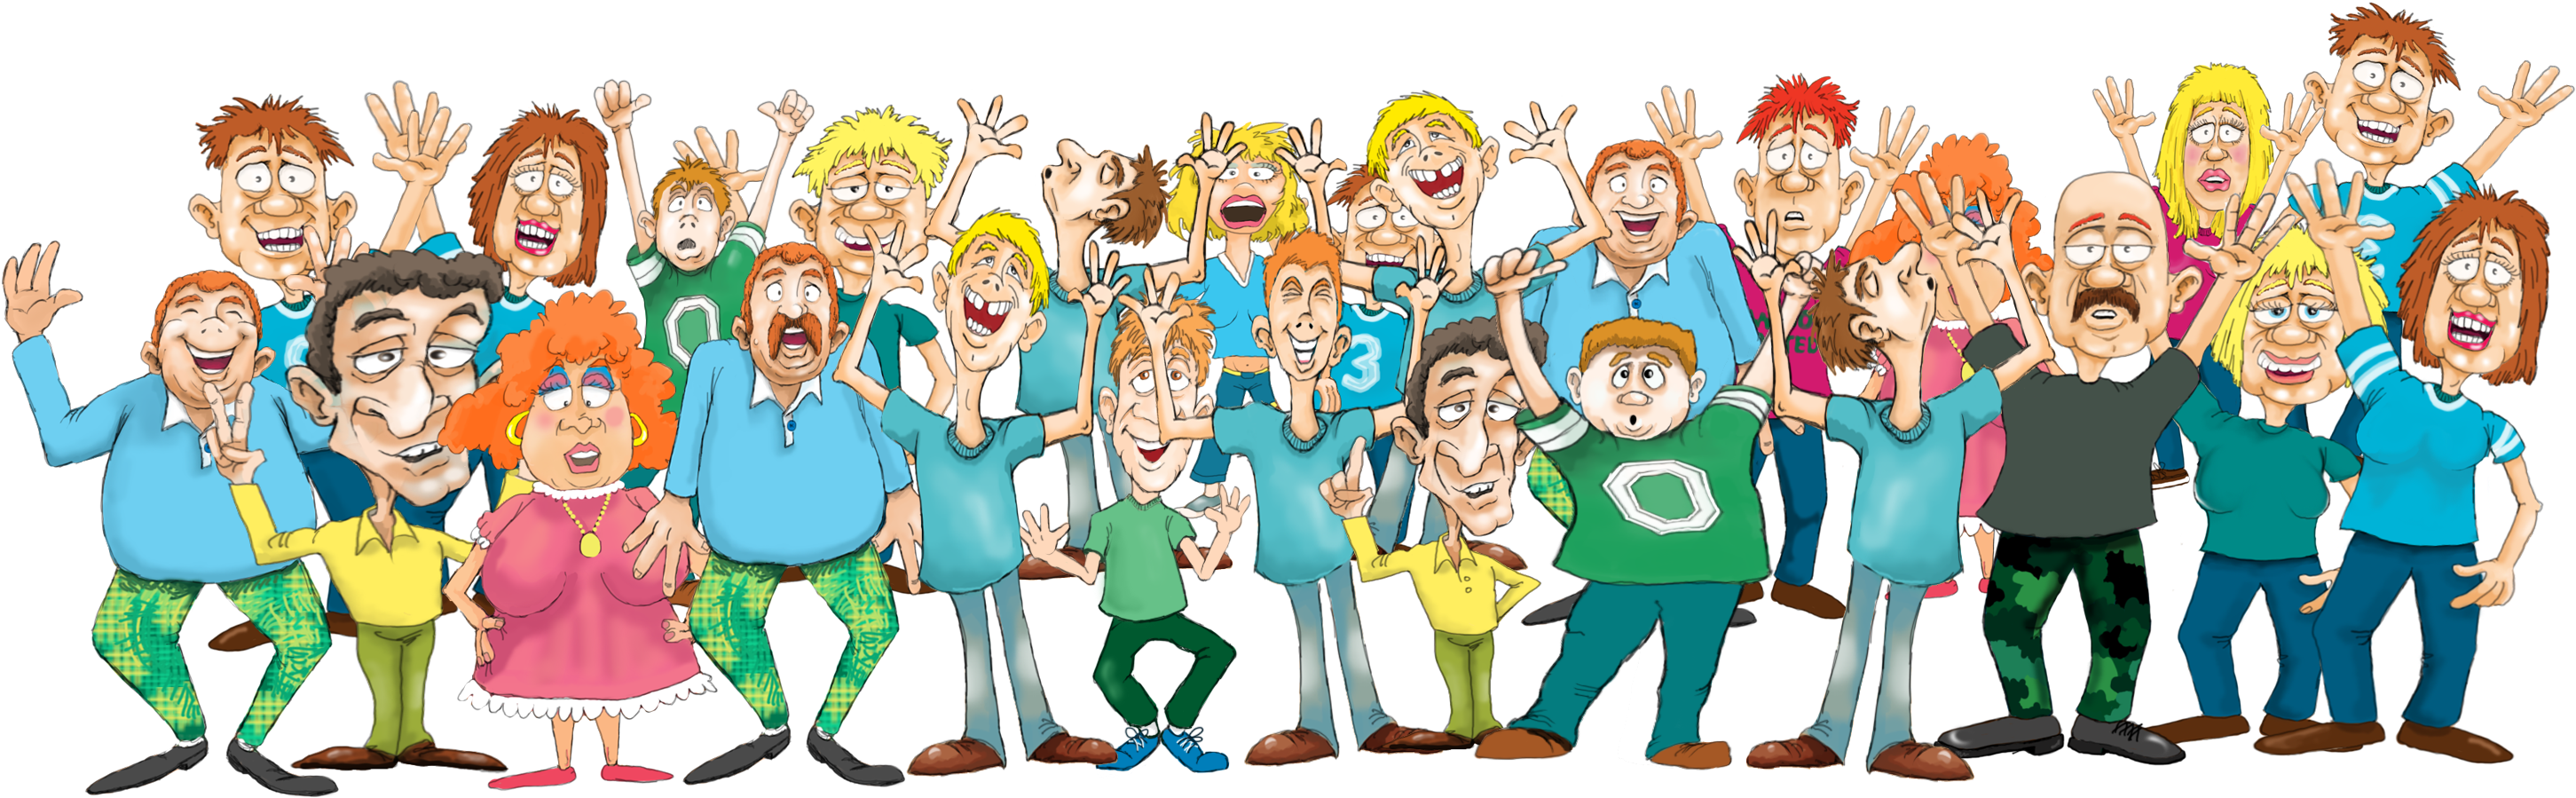 A Group Of Cartoon People